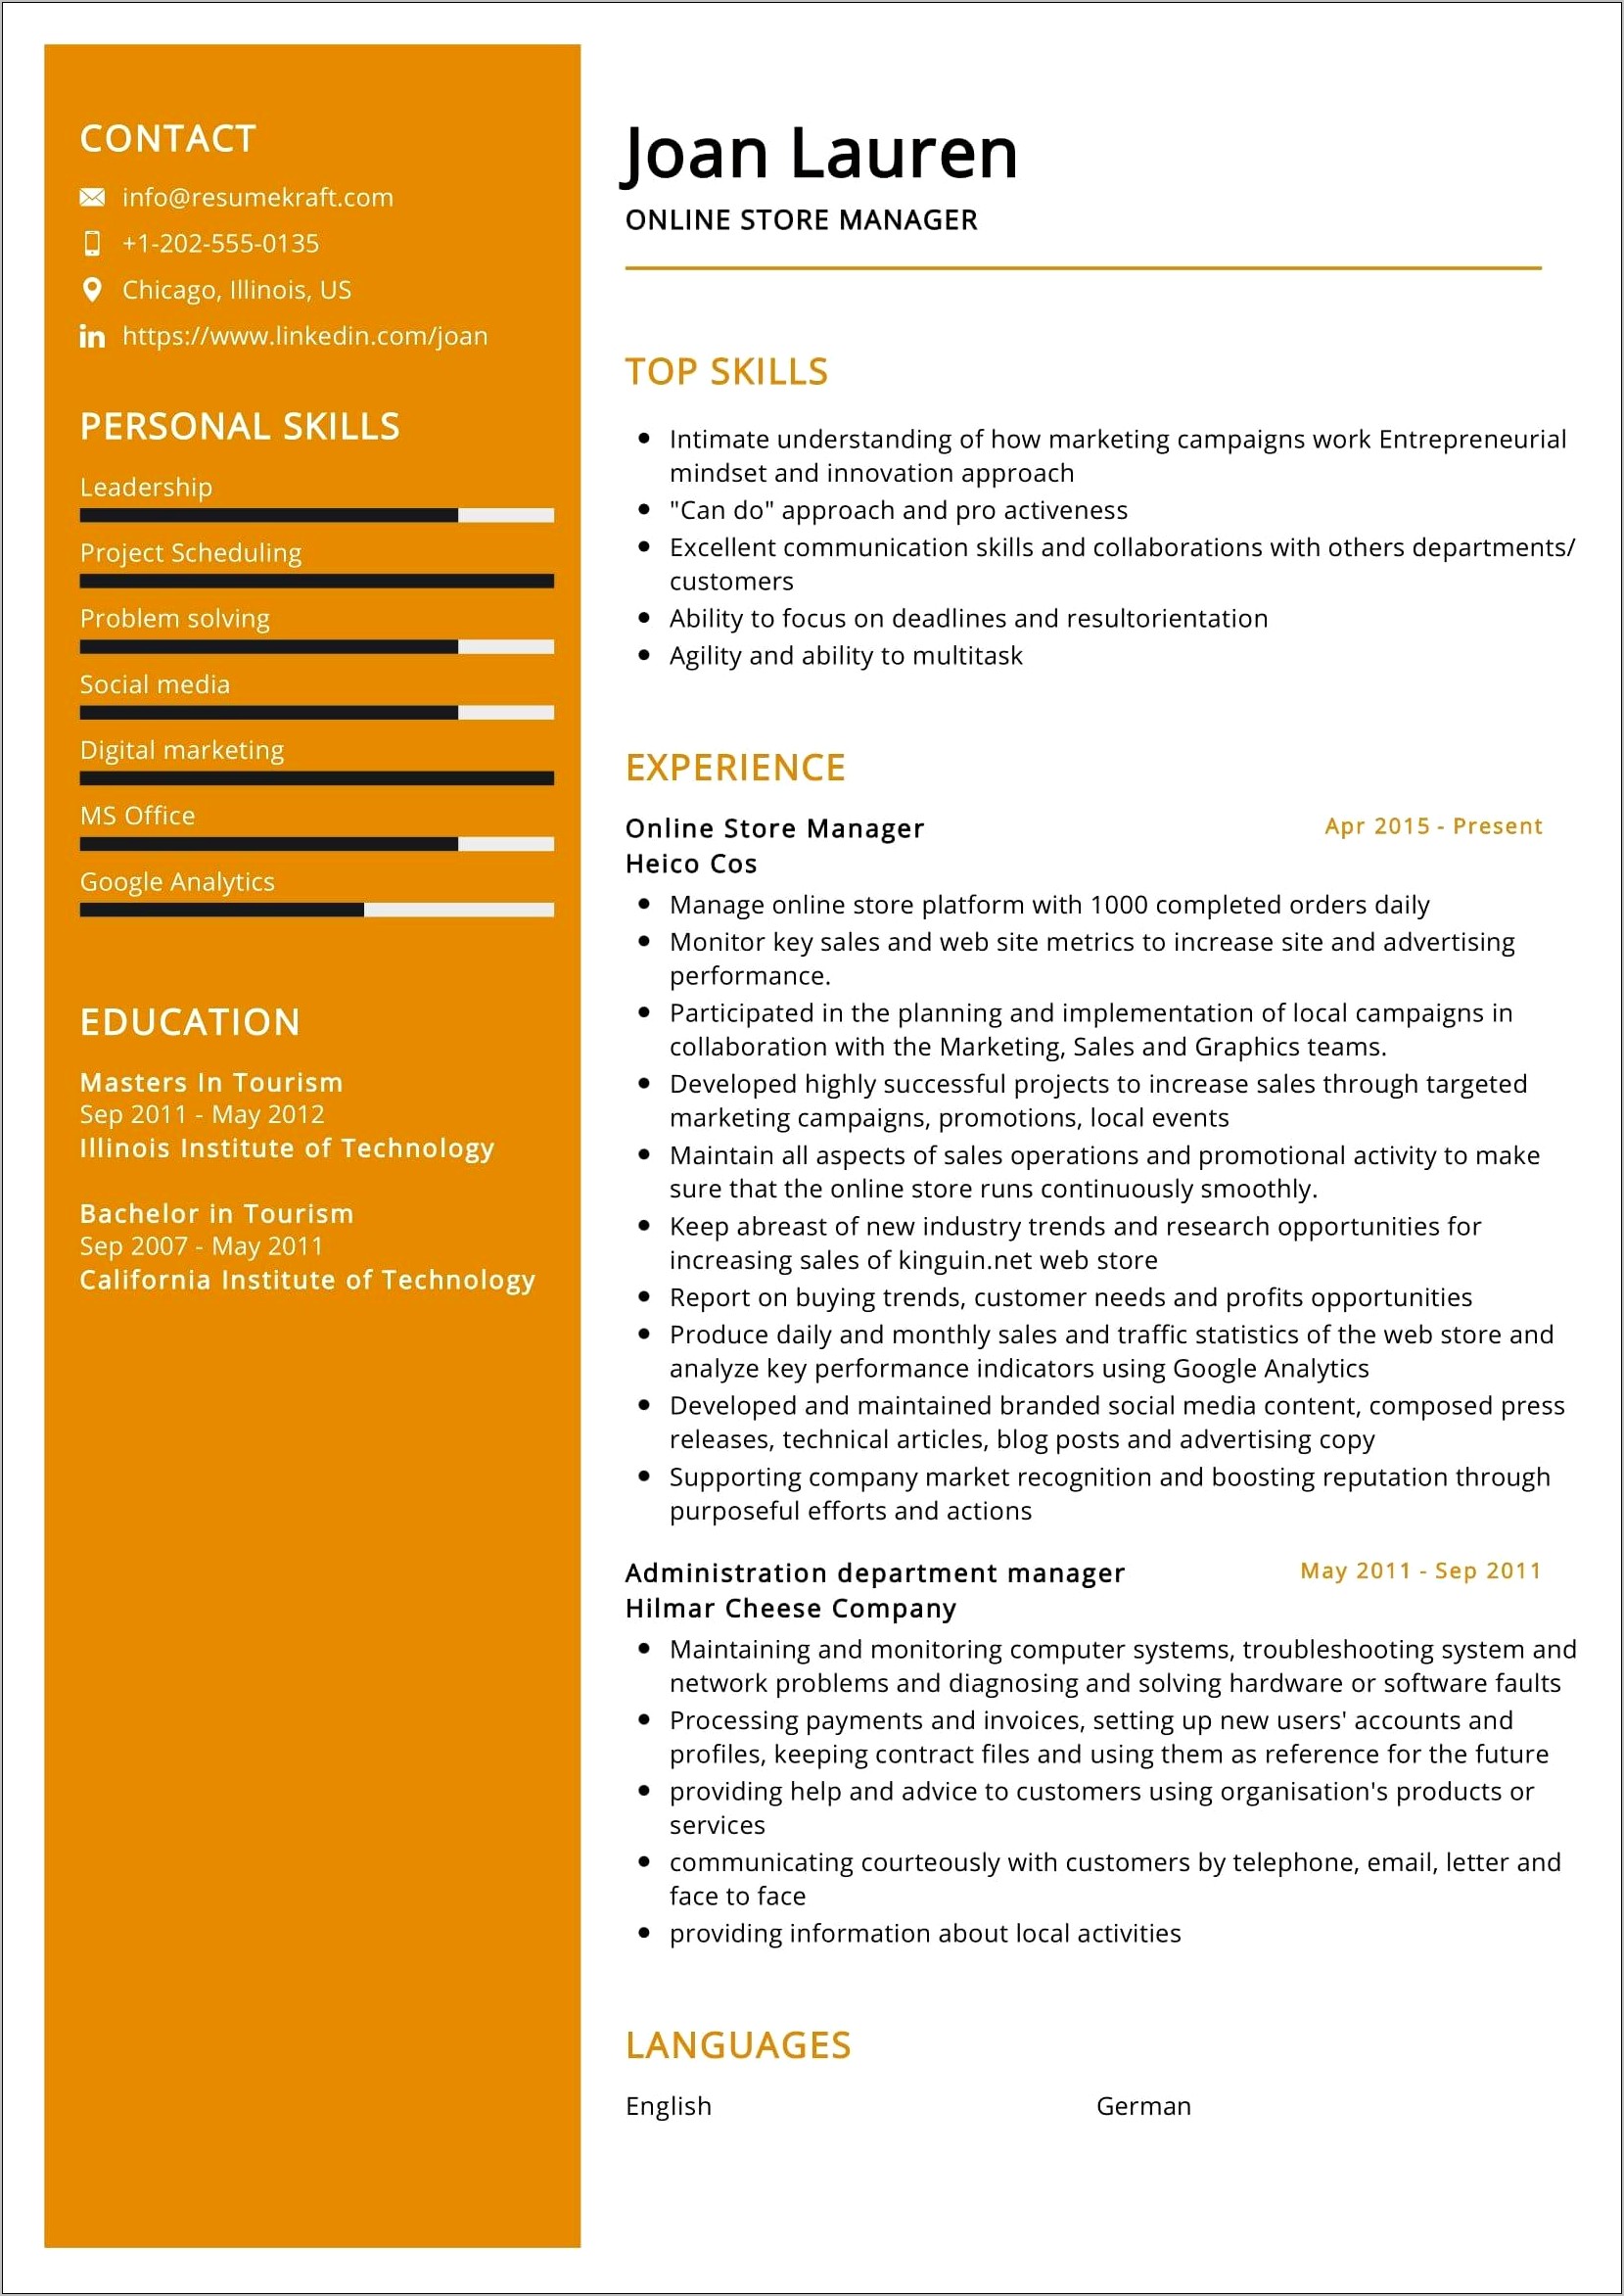 Resume Format In Word For Store Manager